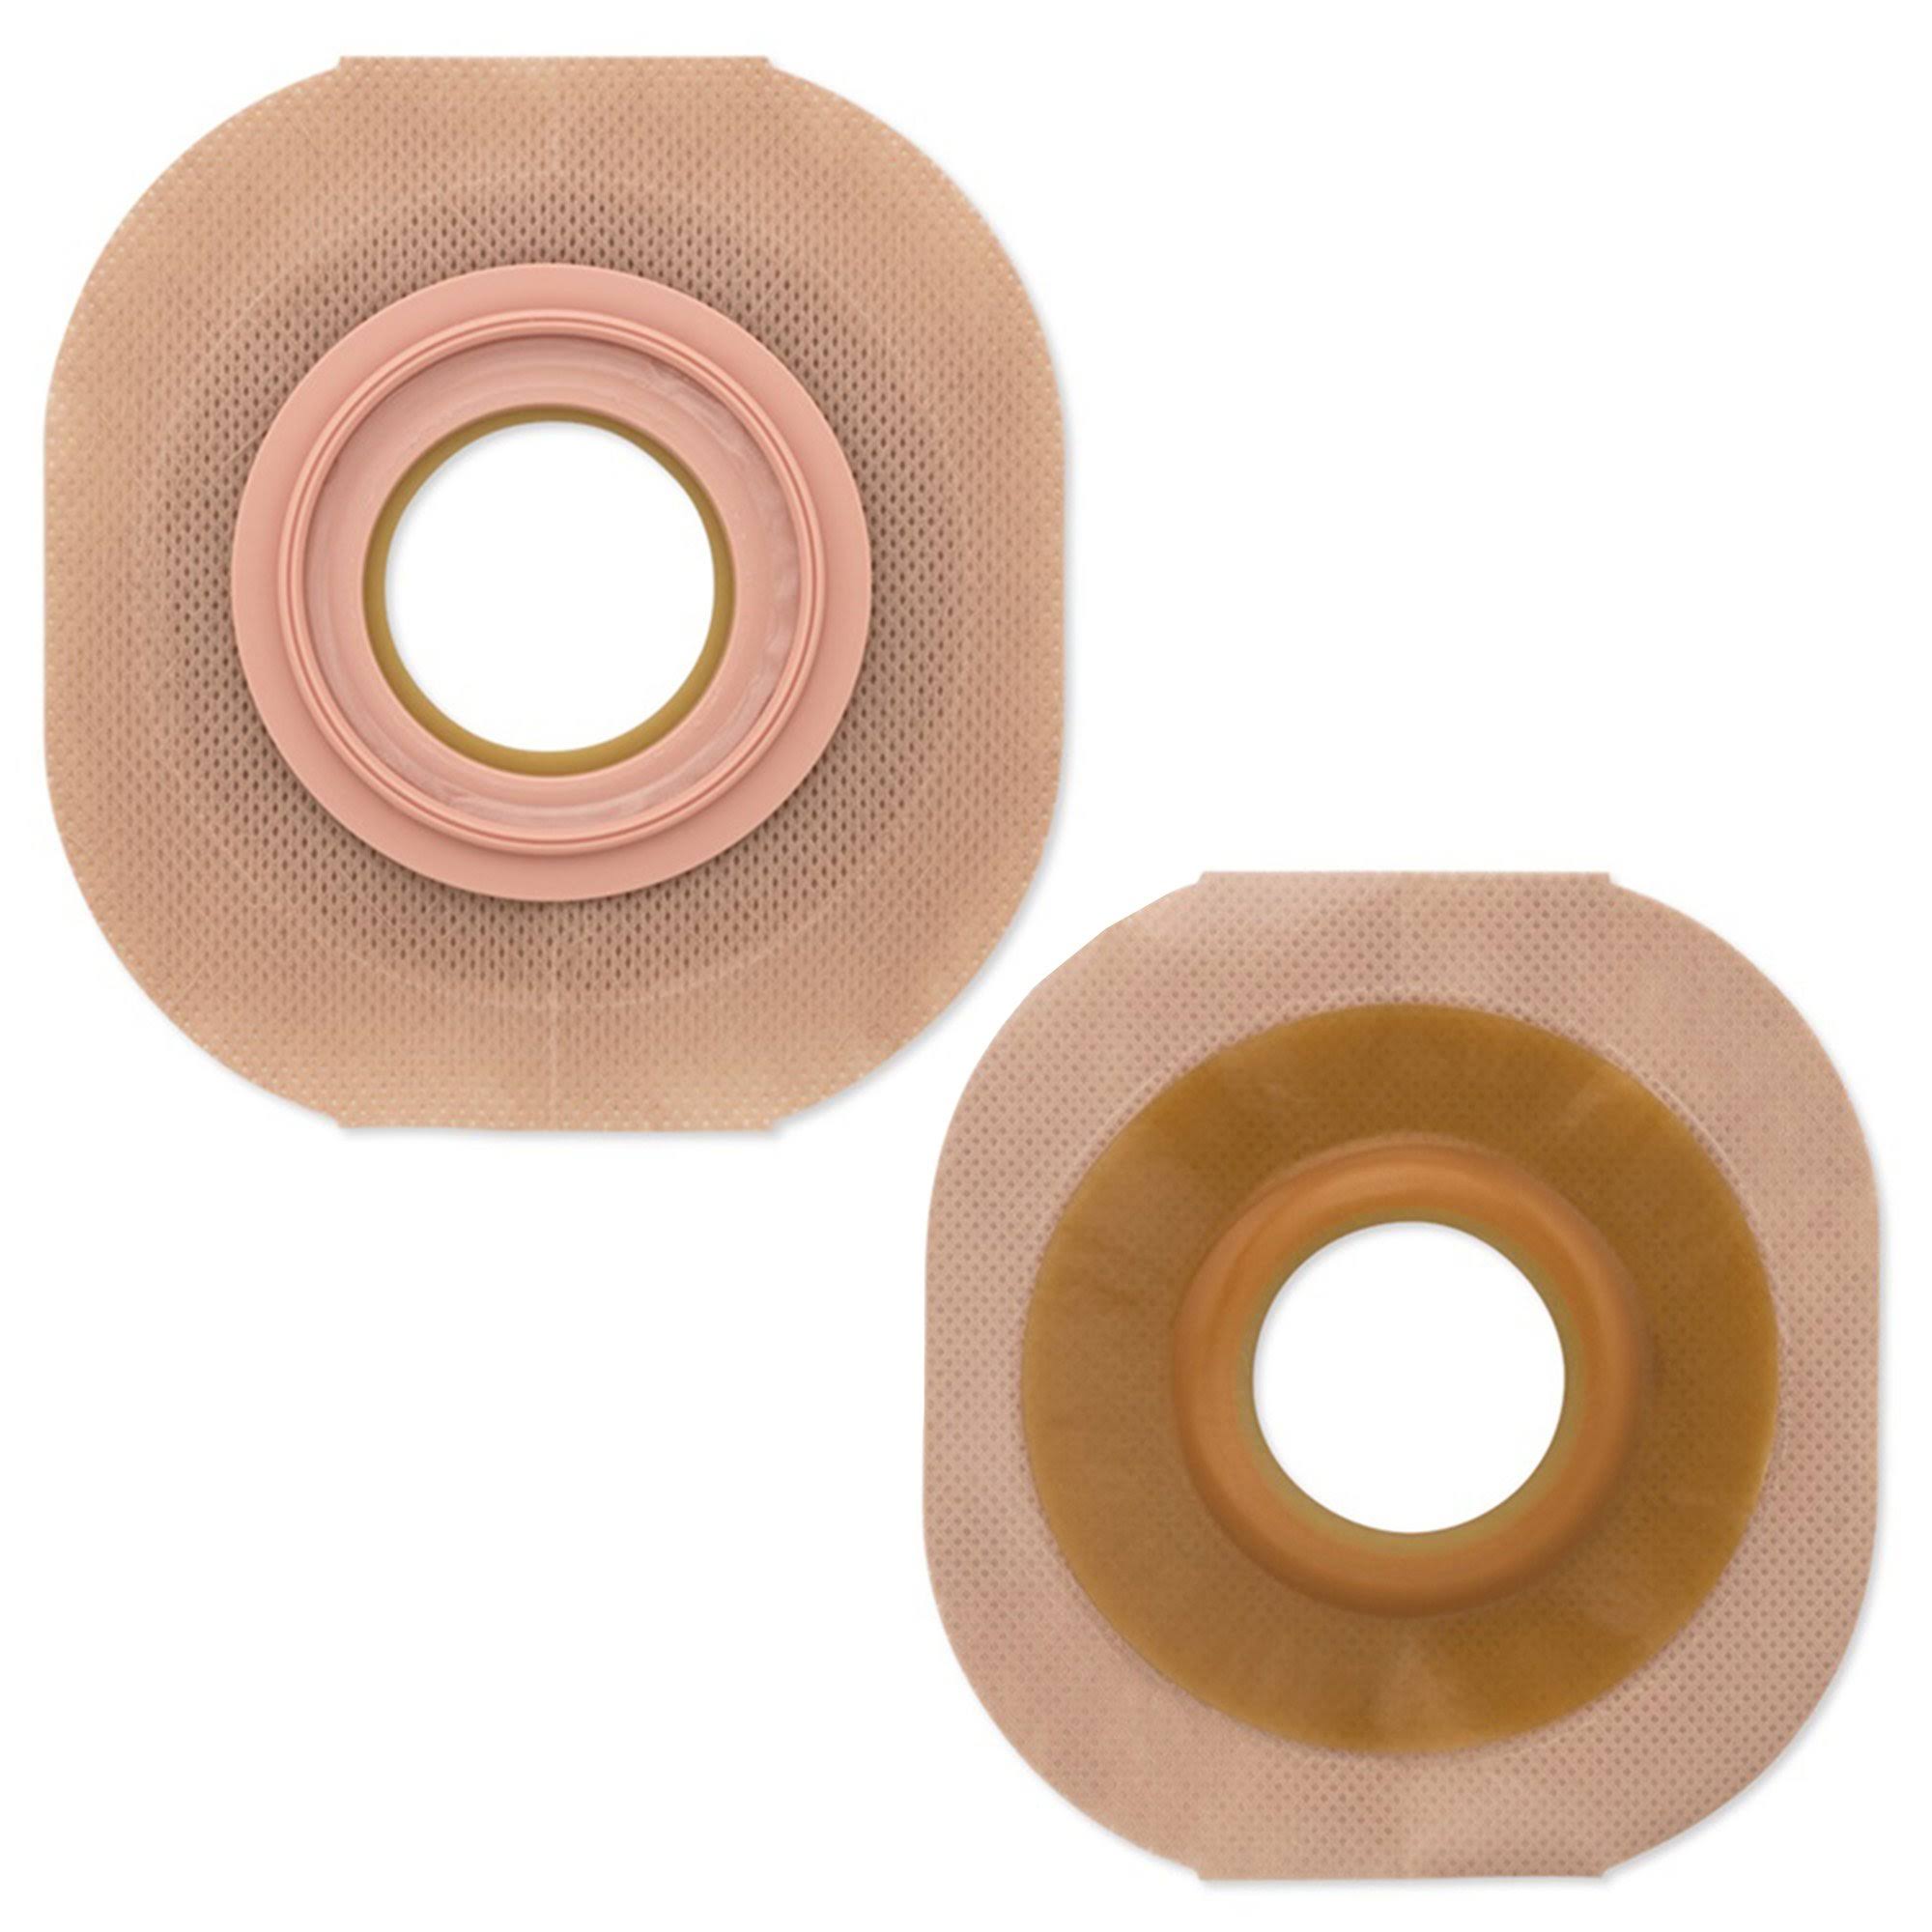 Ostomy Barrier Up To 1 1/2 Inch Stoma Opening Box of 5